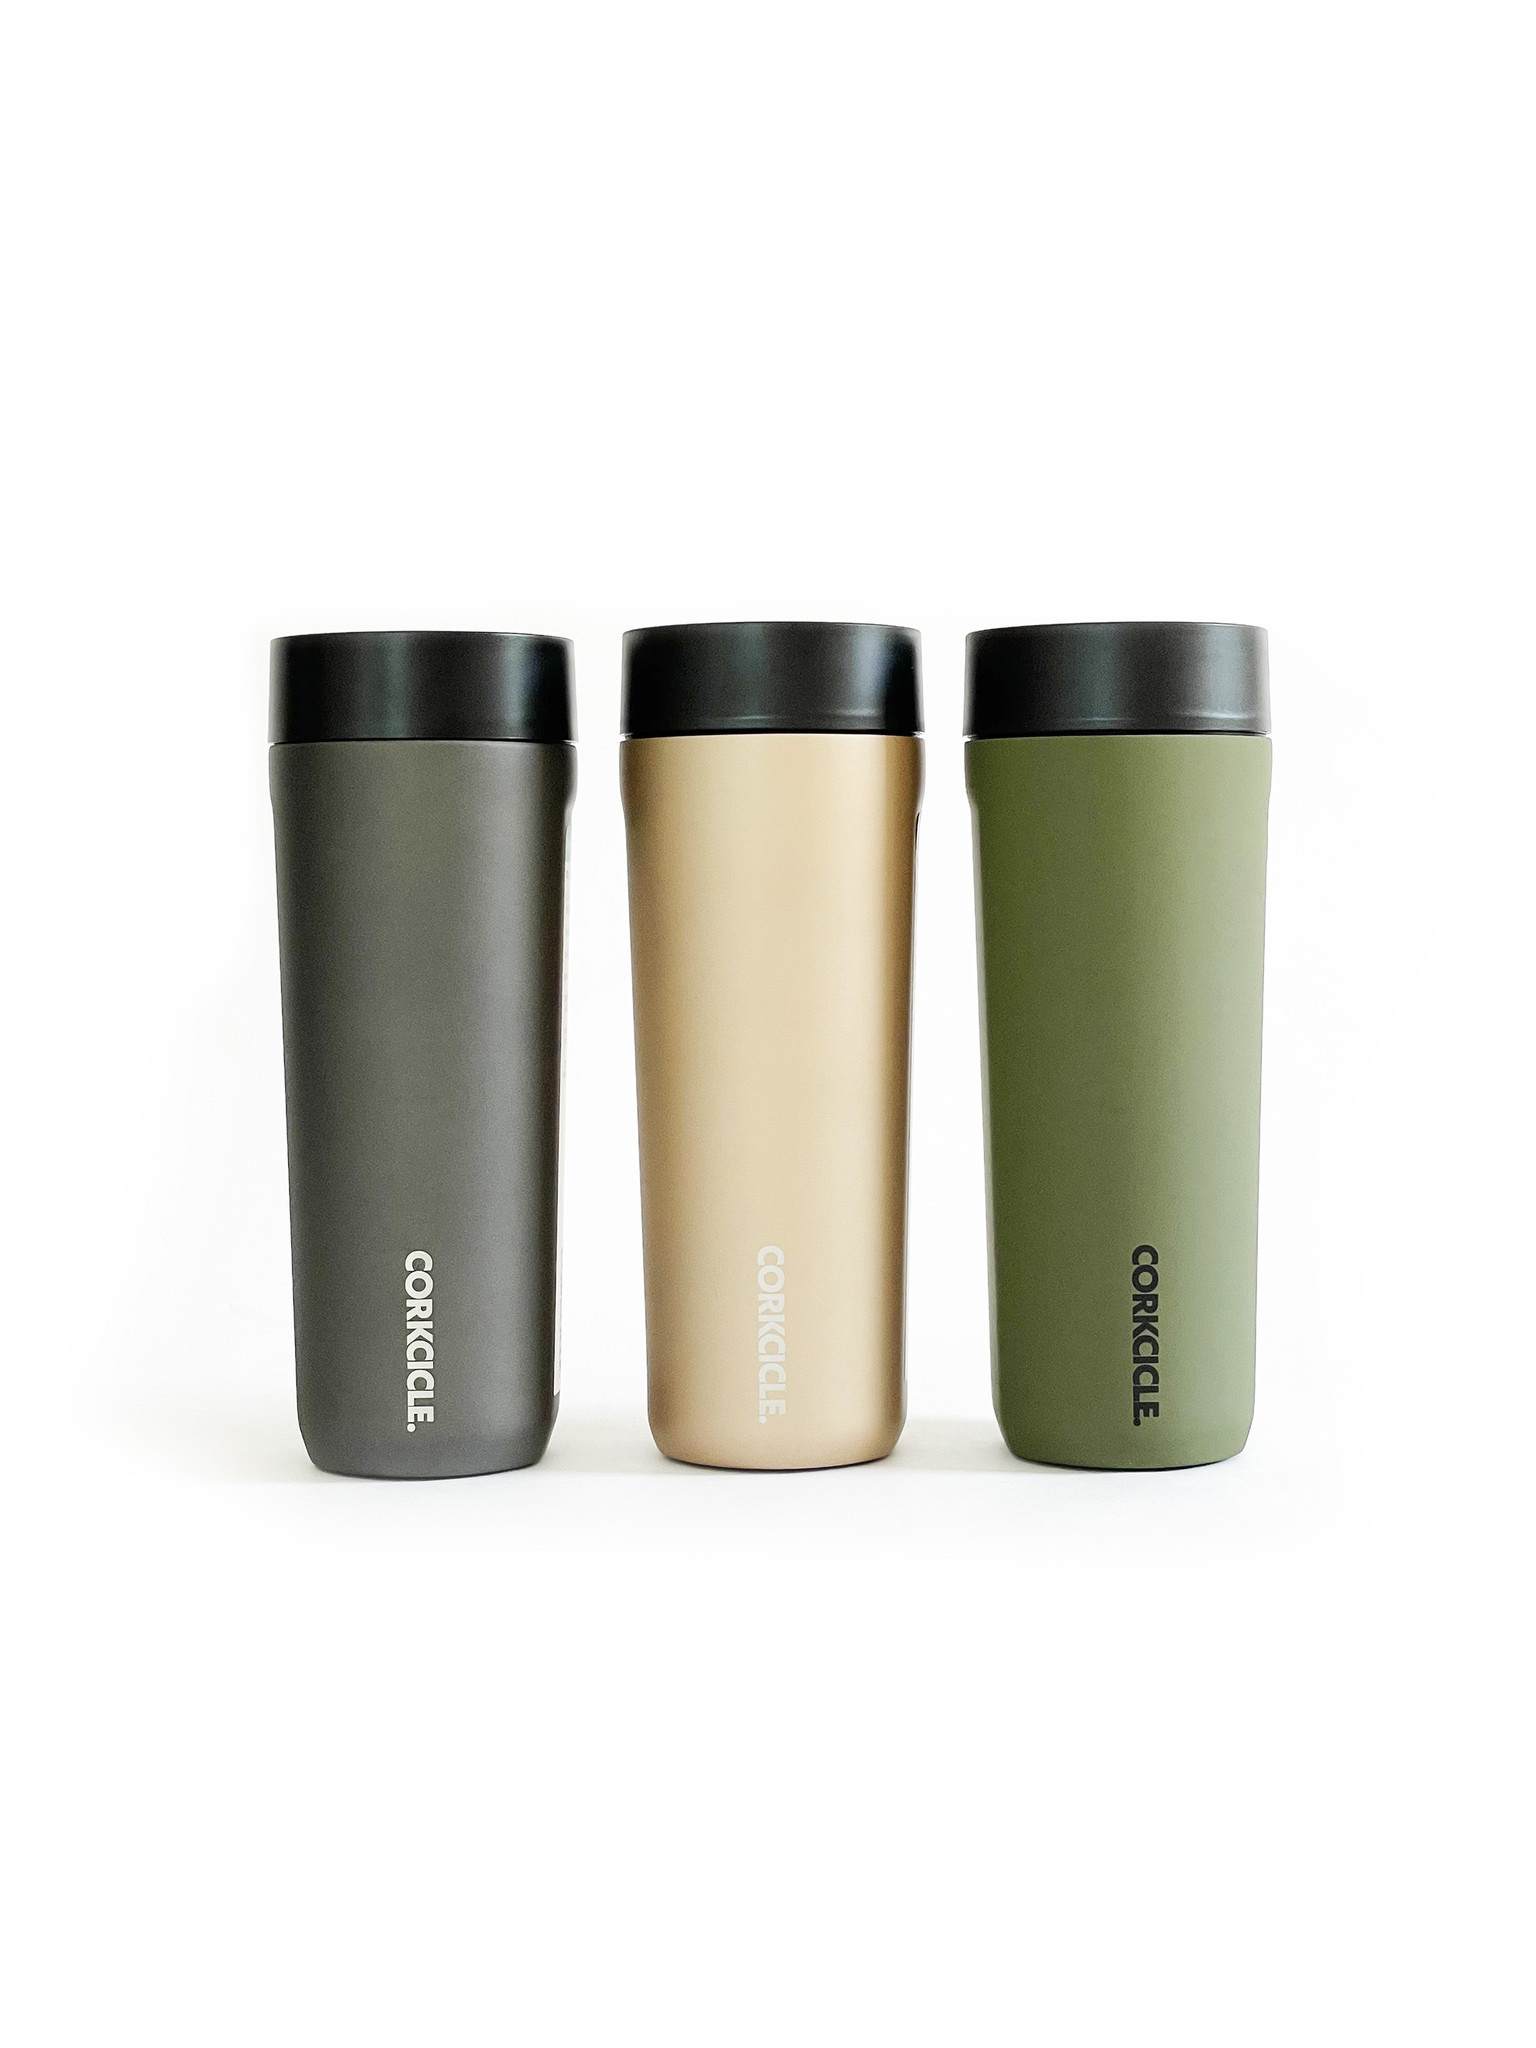 Corkcicle Commuter Insulated Tumbler, 17 oz.-1